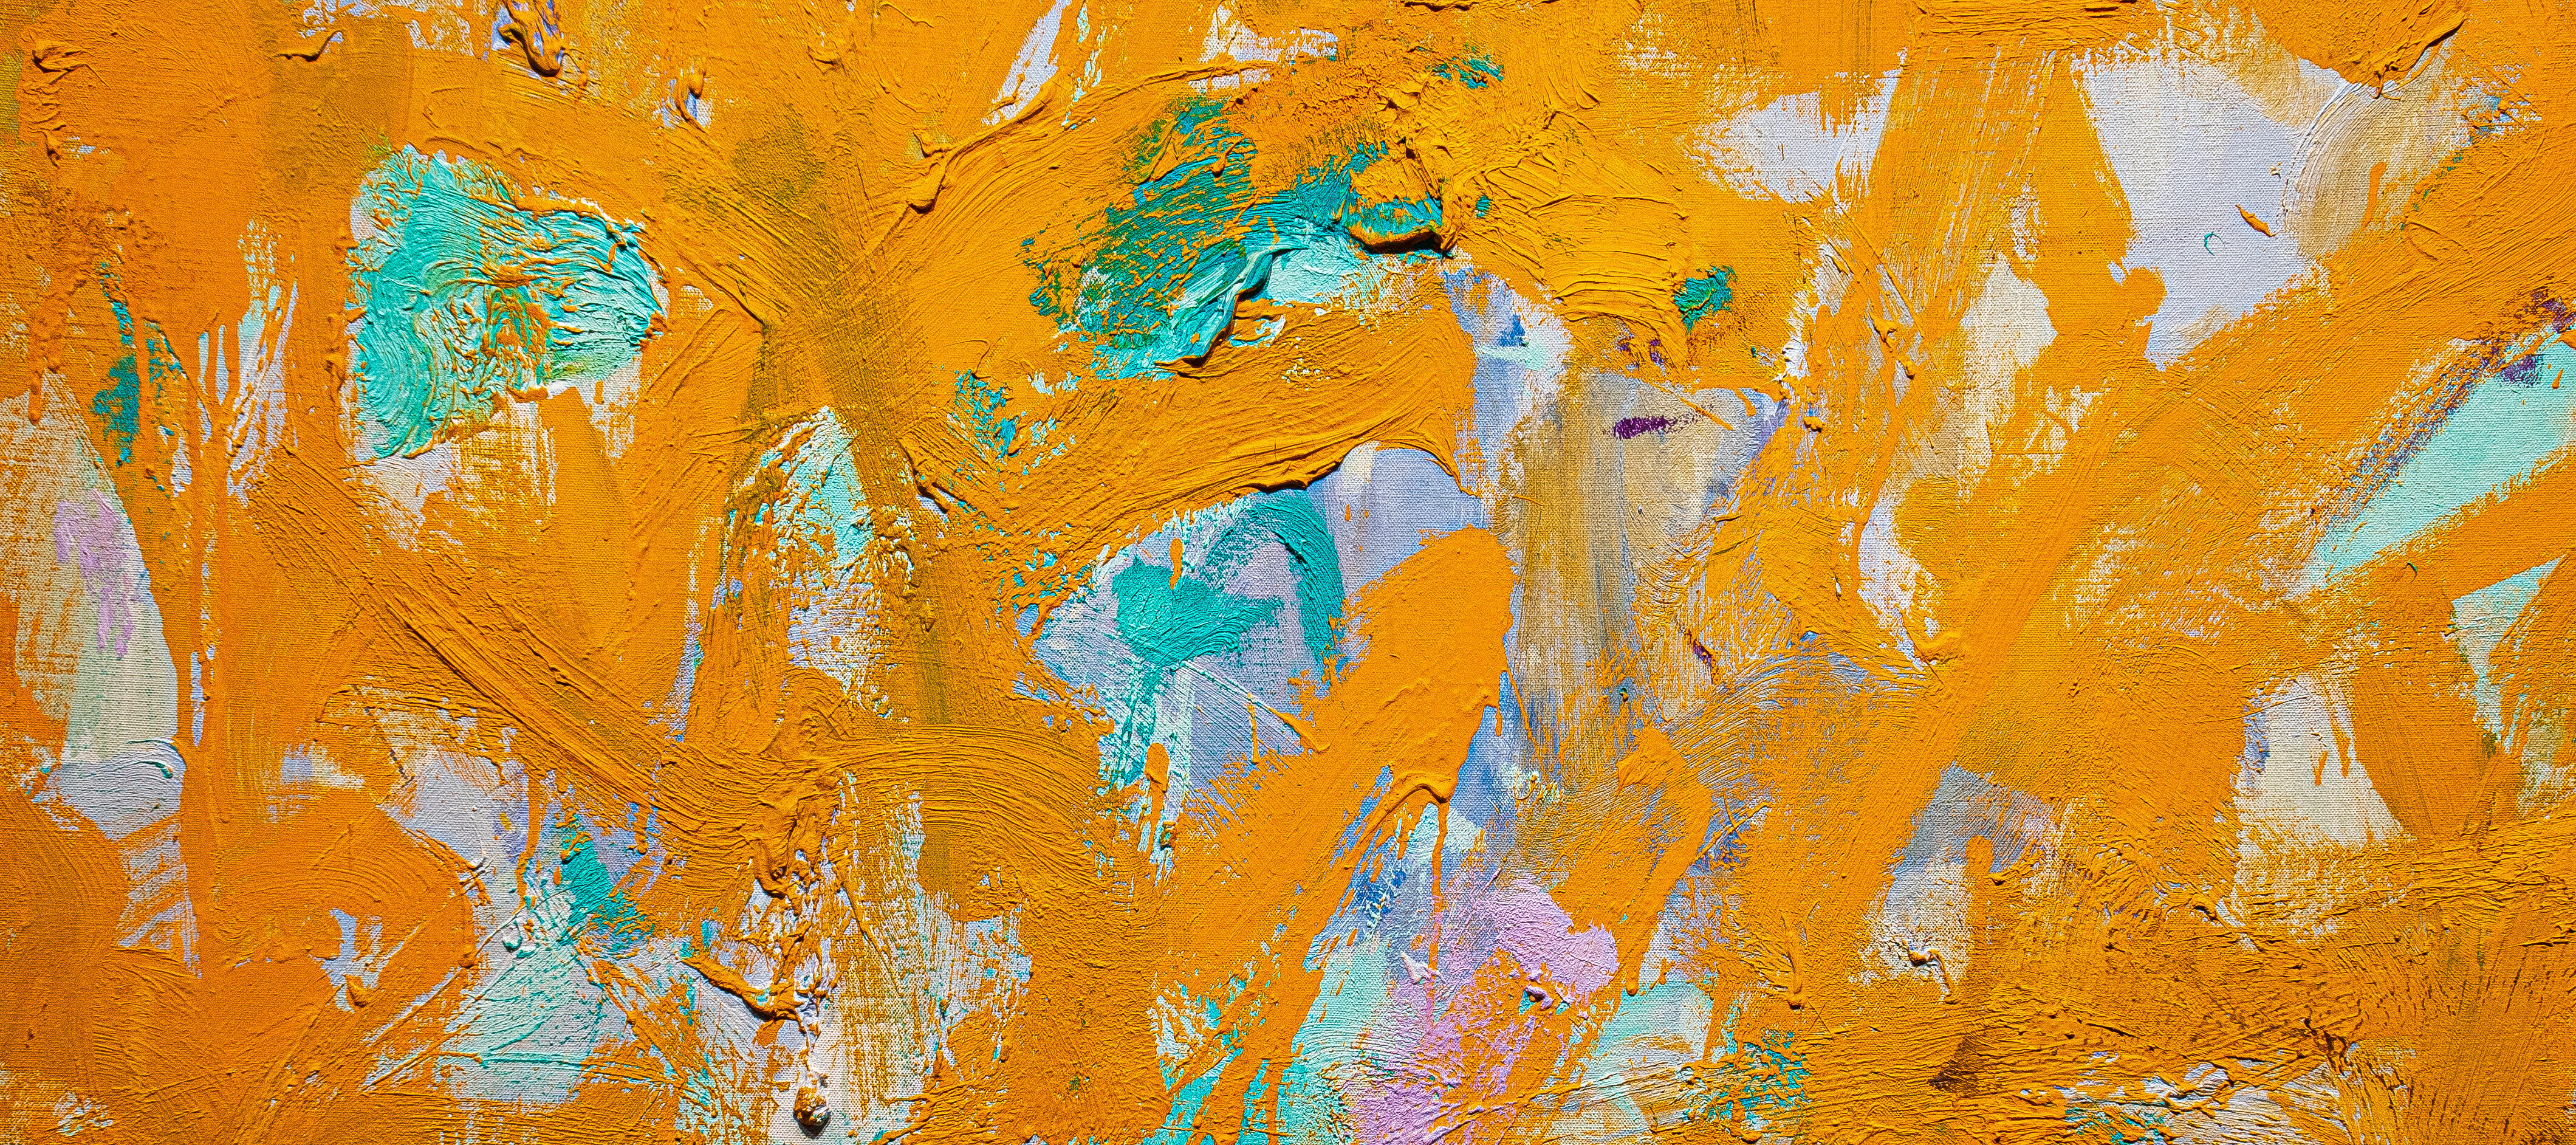 Close-up detail of an abstract painting with very thick and gestural brushstrokes of mostly orange paint.